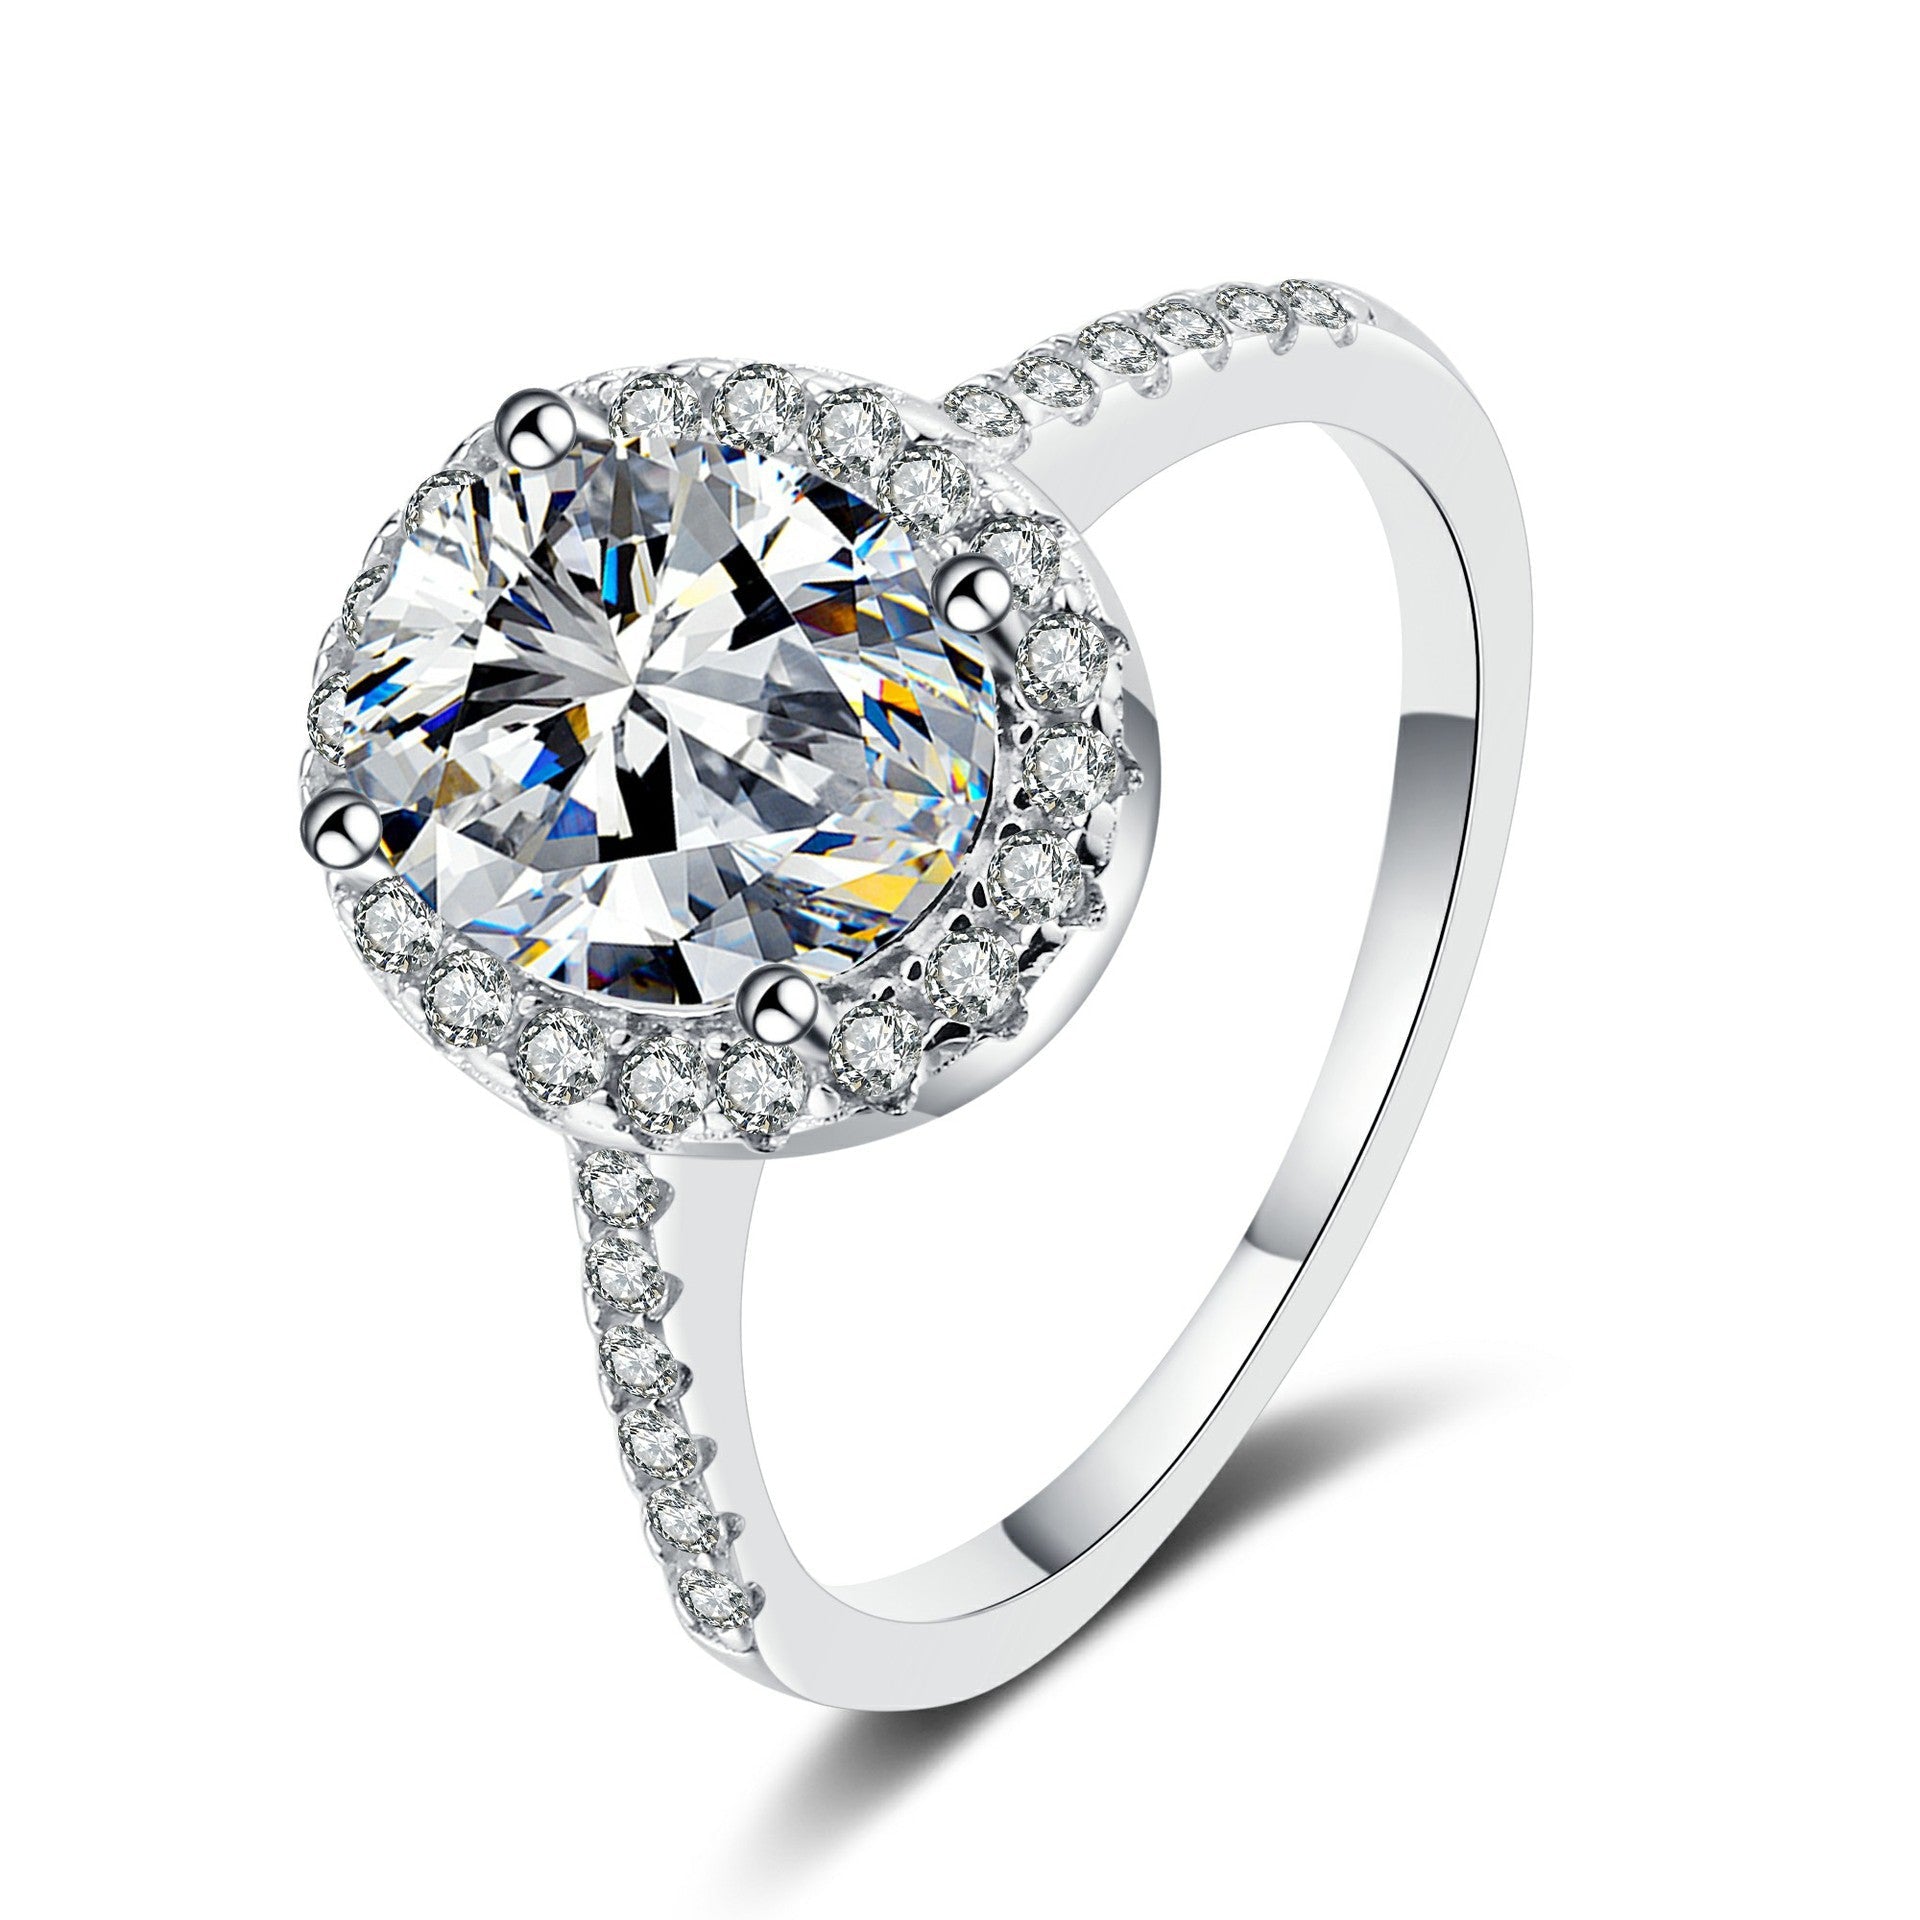 2 Carat Oval Moissanite Ring - HERS